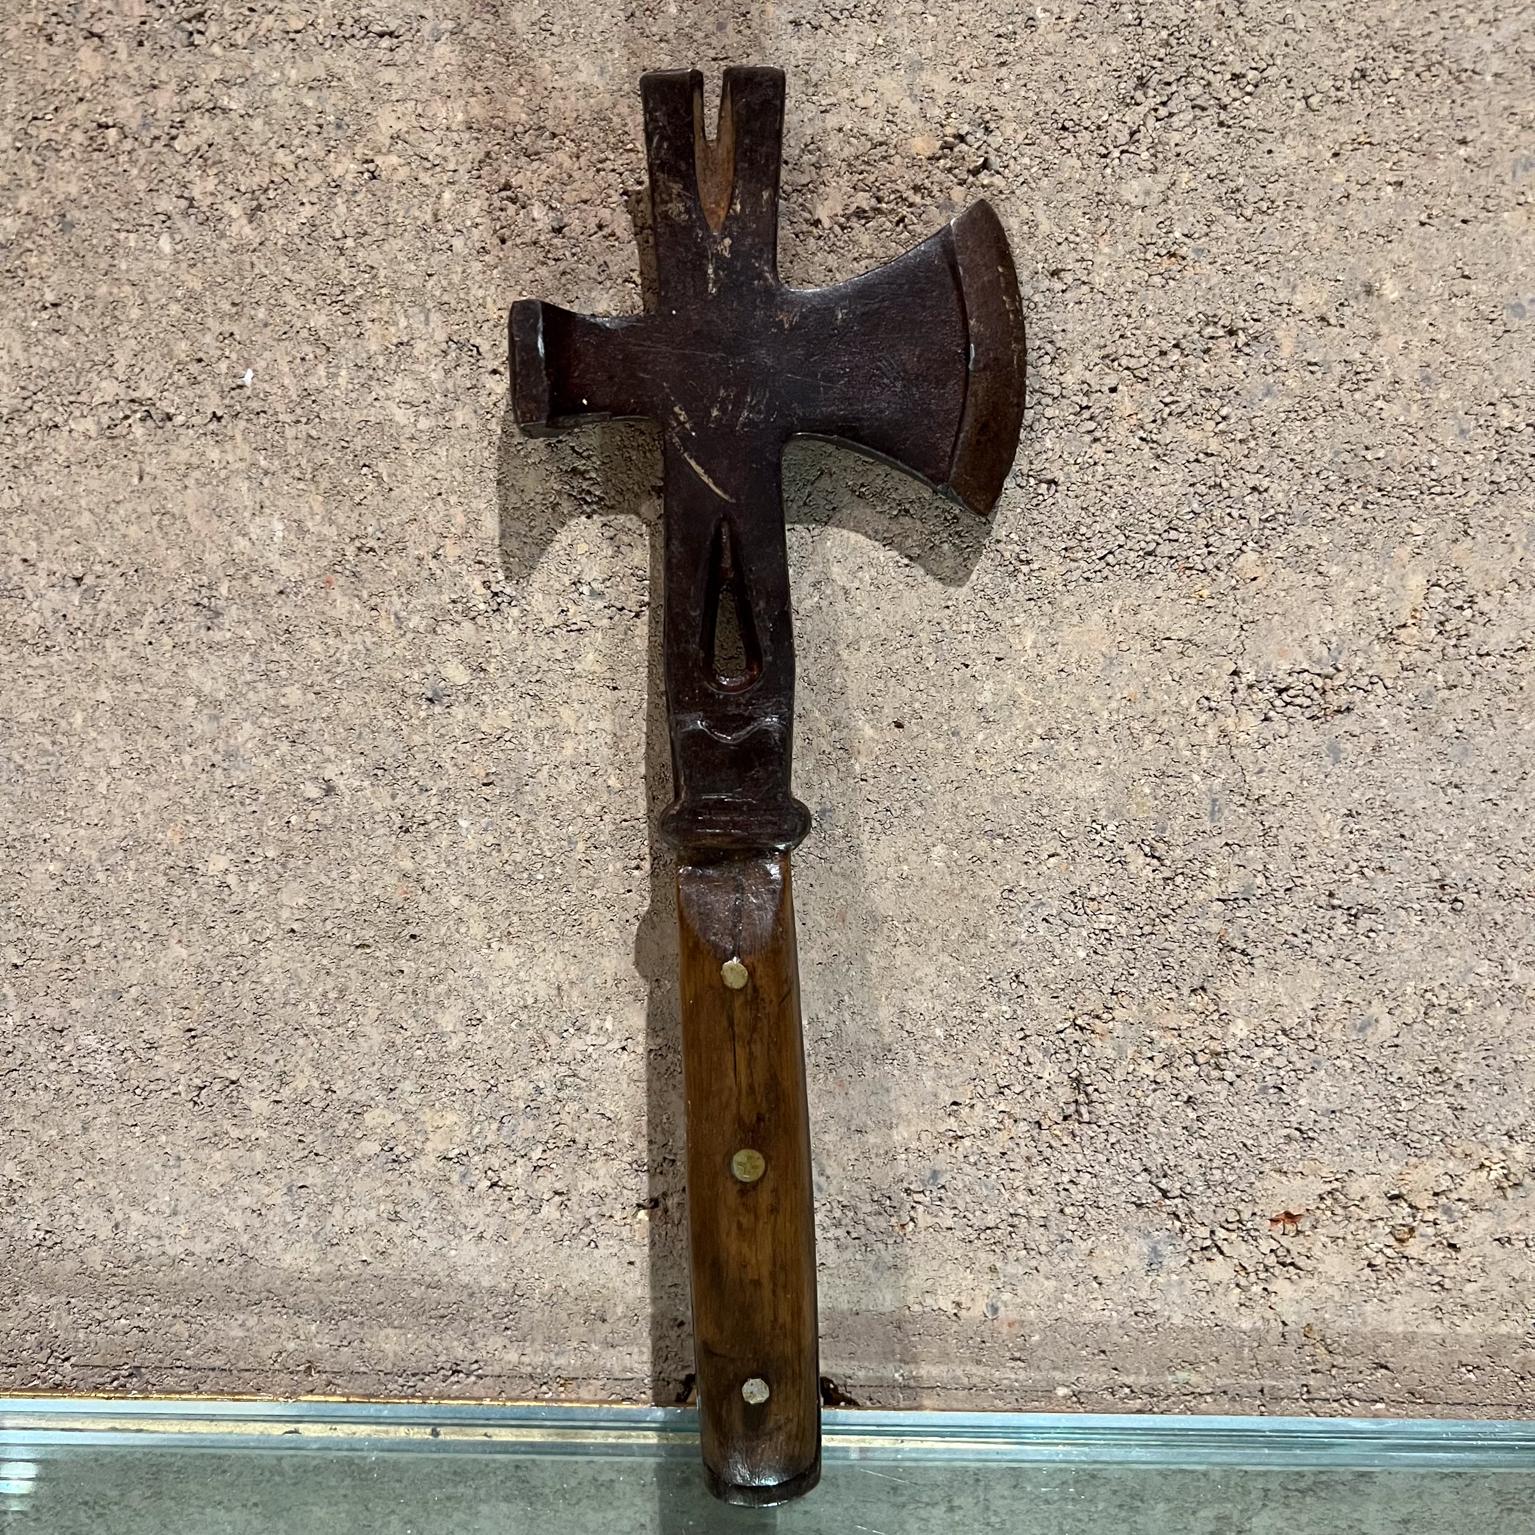 Vintage Swordfish emergency survival tool
Tomahawk Crate Hammer Hatchet Axe
Use as Pry Bar Nail Puller Multi-function implement
13.25 h x 4.75 w x 1.13 d
Logo present
Original unrestored condition.
See all images provided